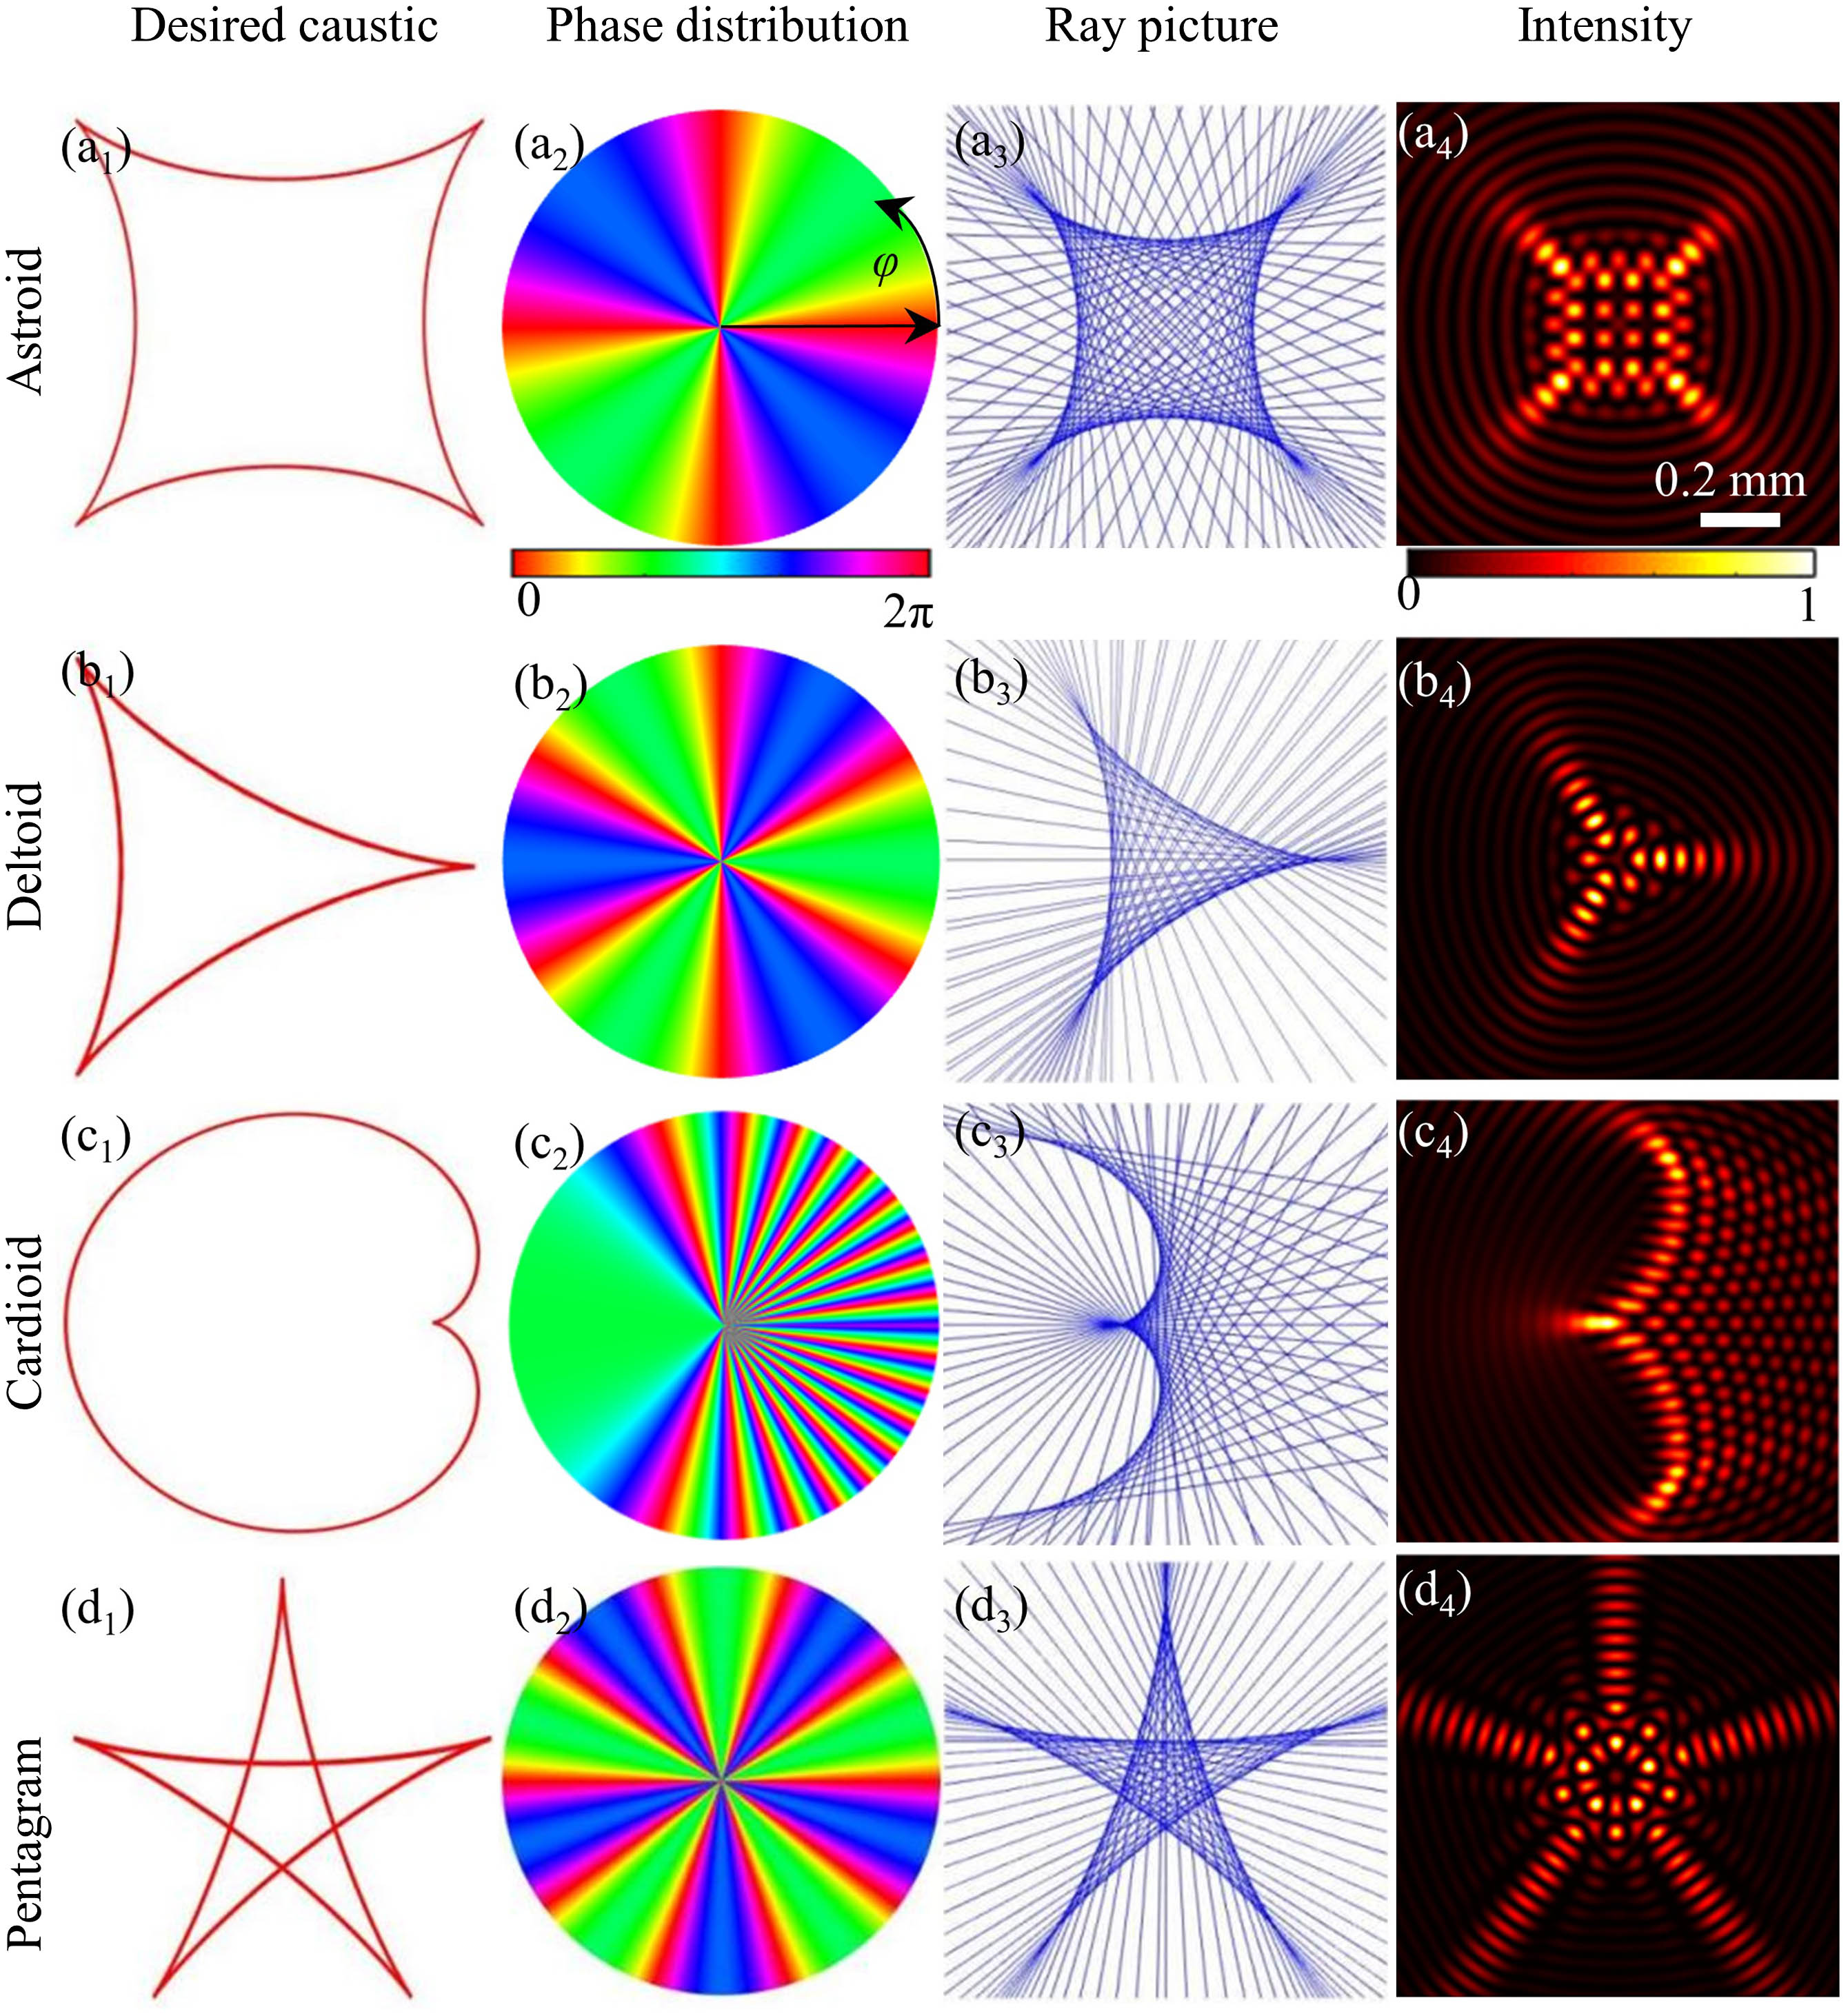 Shaping nondiffracting structured caustic beams. (a) Astroid; (b) deltoid; (c) cardioid; (d) pentagram caustics. (a1)–(d1) Caustic lines; (a2)–(d2) phase distributions; (a3)–(d3) ray pictures; (a4)–(d4) simulated transverse intensities of the astroid, deltoid, cardioid, and pentagram caustics, respectively.